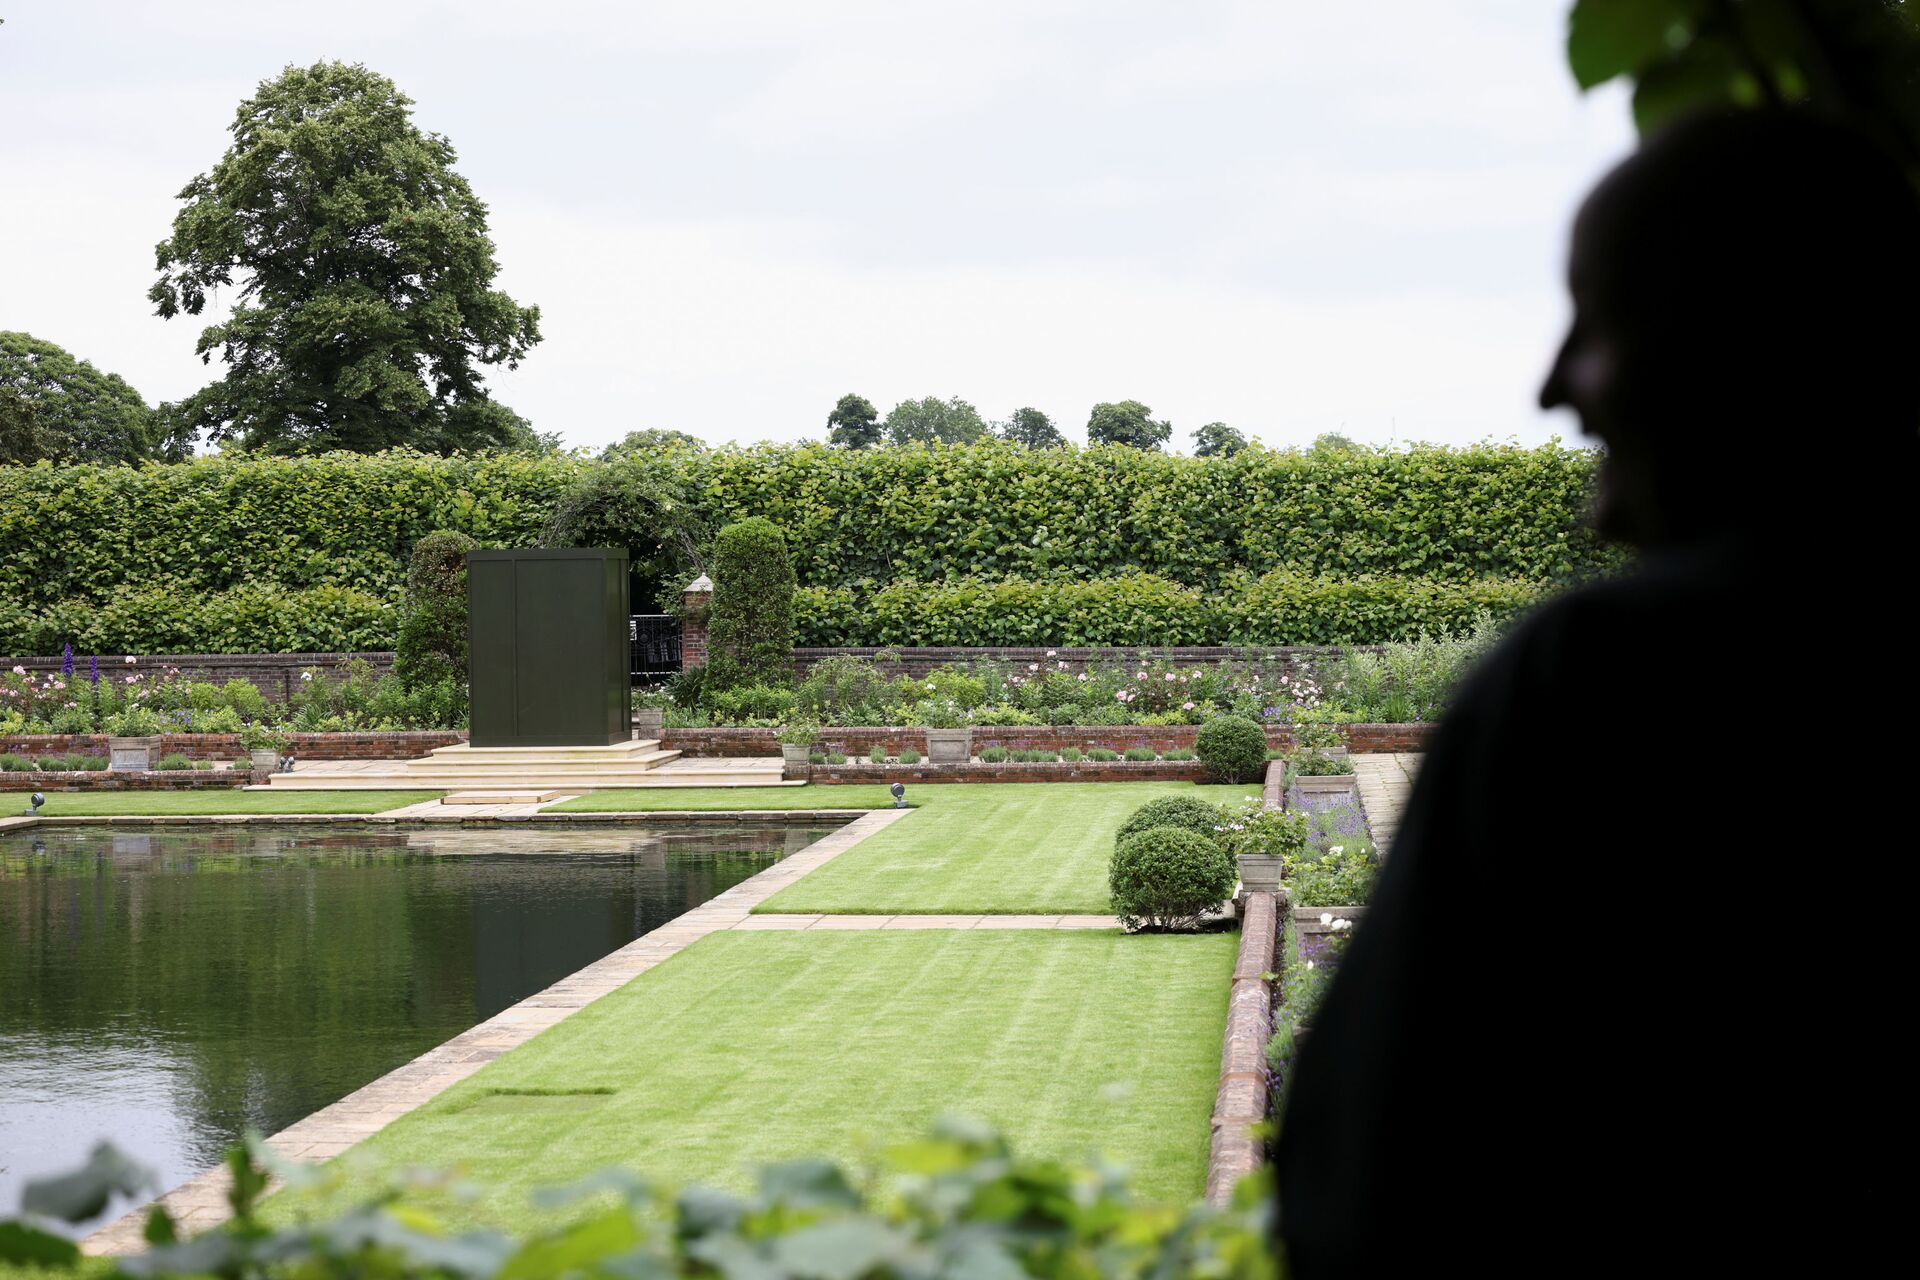 A person looks on as a box covers the statue of Britain's Princess Diana installed in the Sunken Garden of Kensington Palace in London, Britain, June 30, 202 - Sputnik International, 1920, 07.09.2021